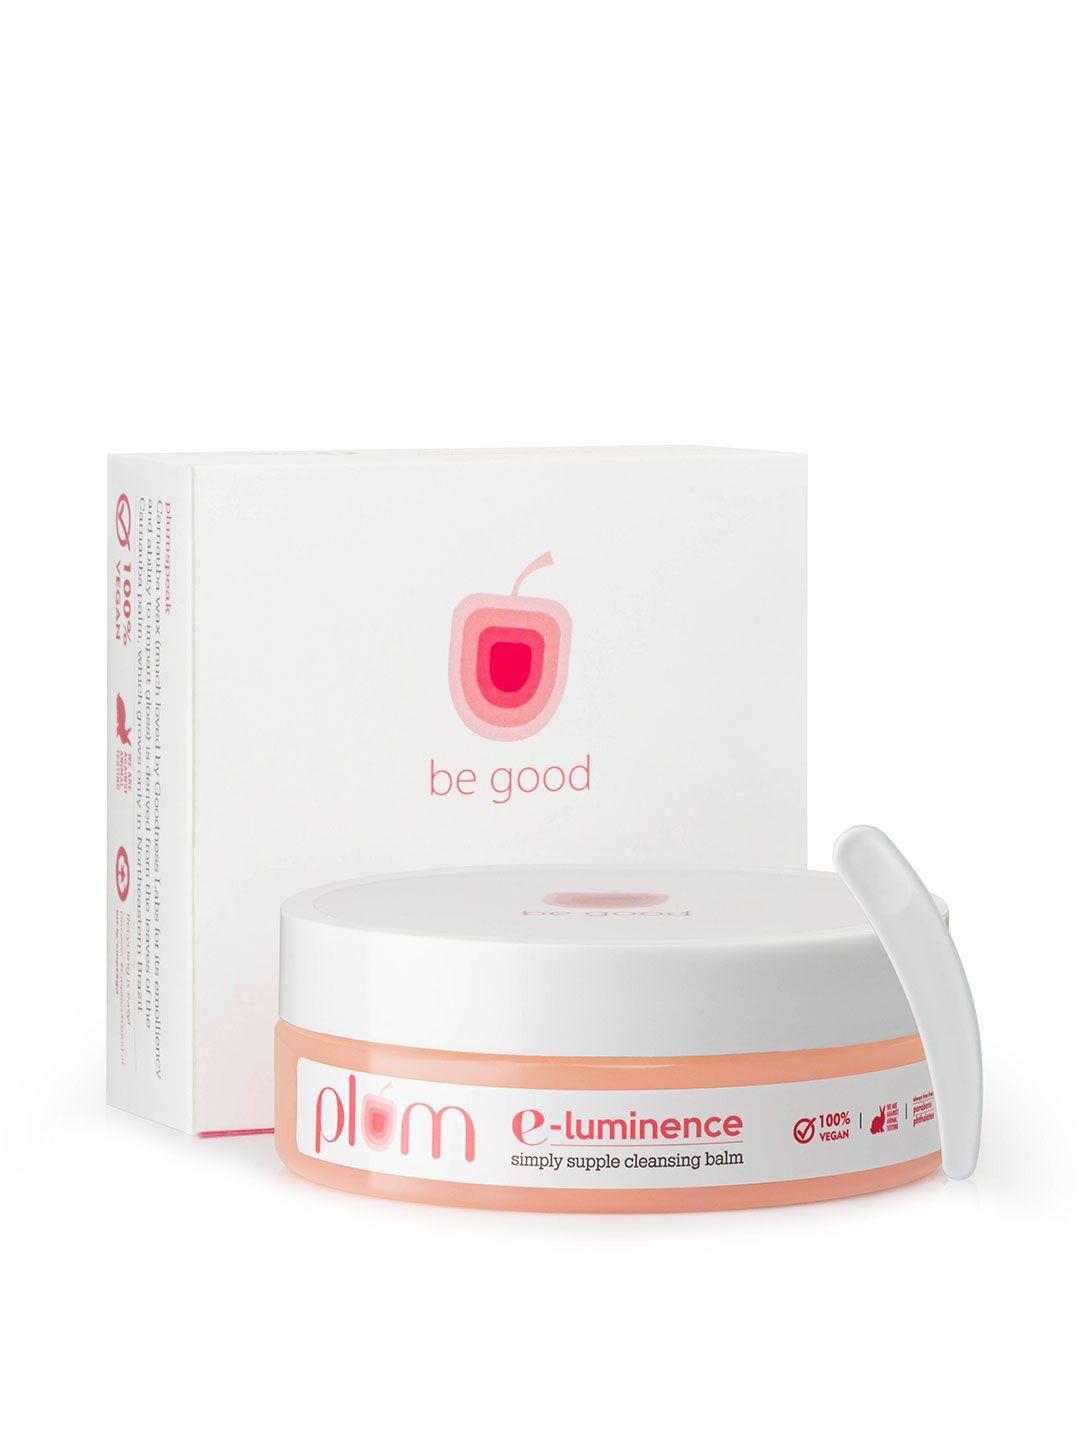 plum e-luminence cleansing balm for lip & eye waterproof makeup removal - 90g